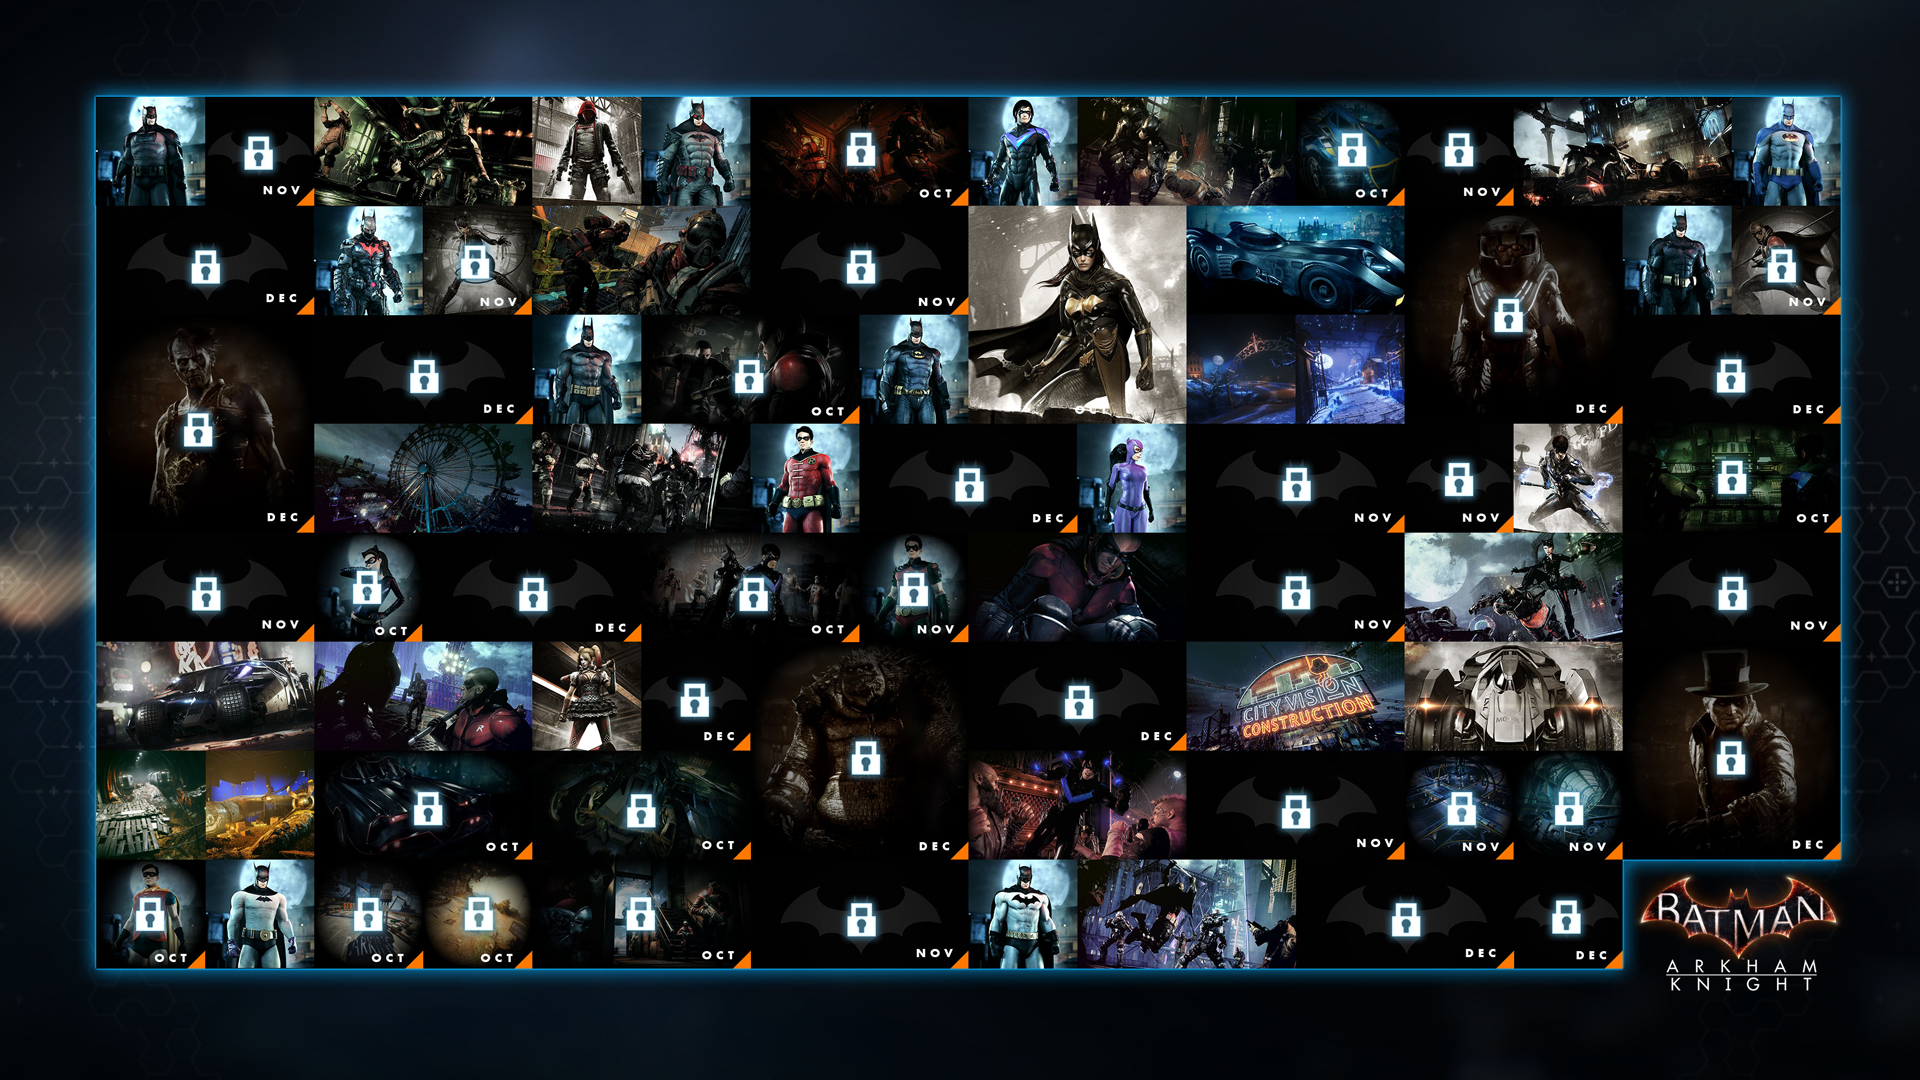 “Batman: Arkham Knight’s” Full Season Pass Revealed - Lots of Skins, AR Missions, and a Few Episodes